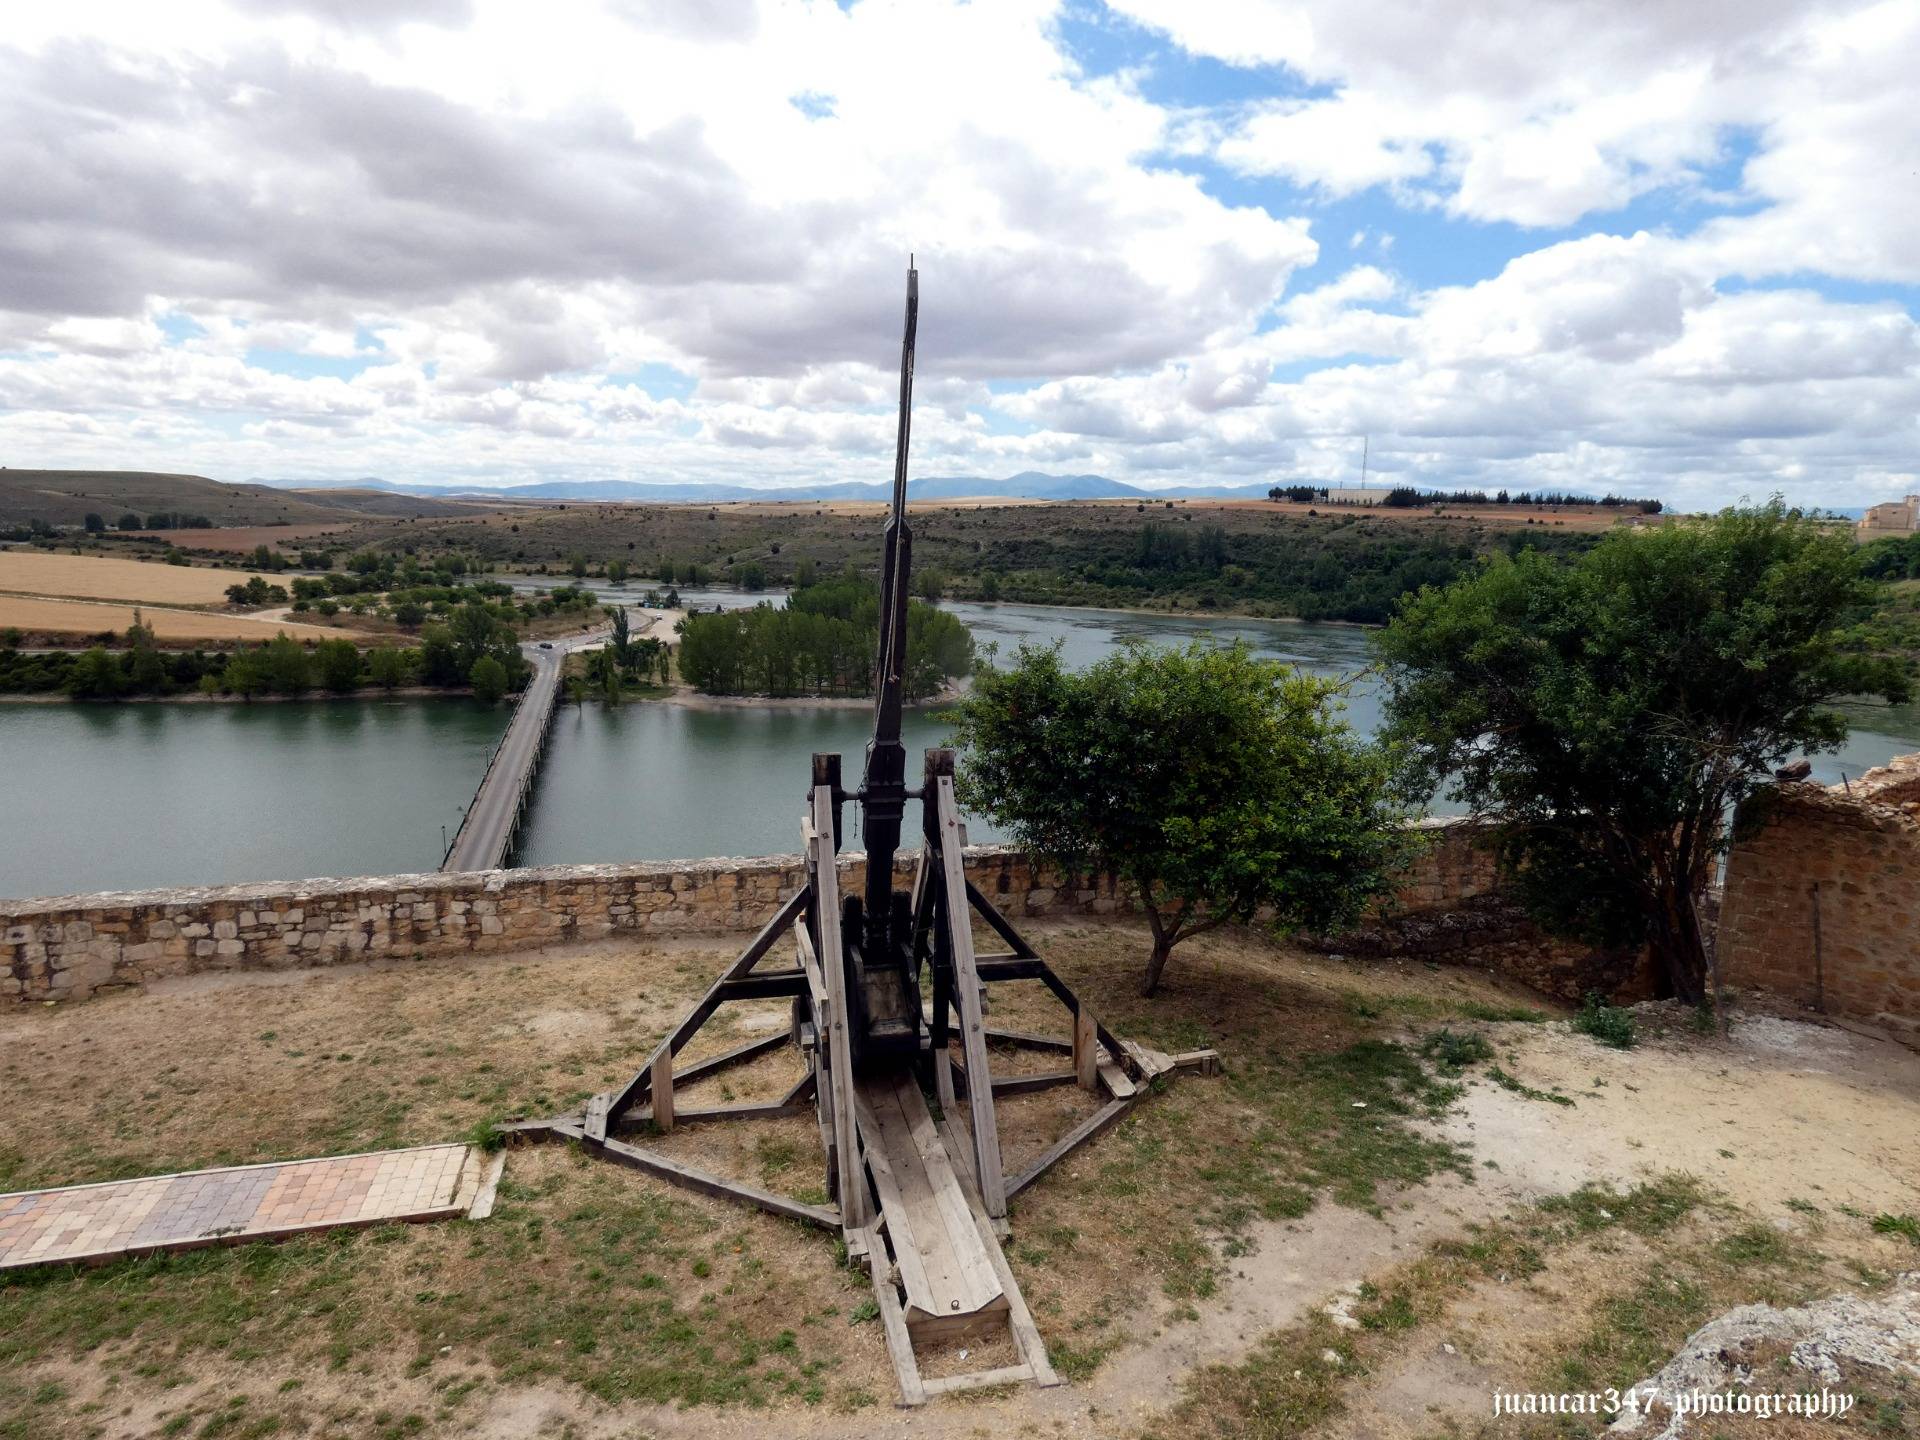 An old catapult watches over the bridge that rises over the waters of the Linares reservoir